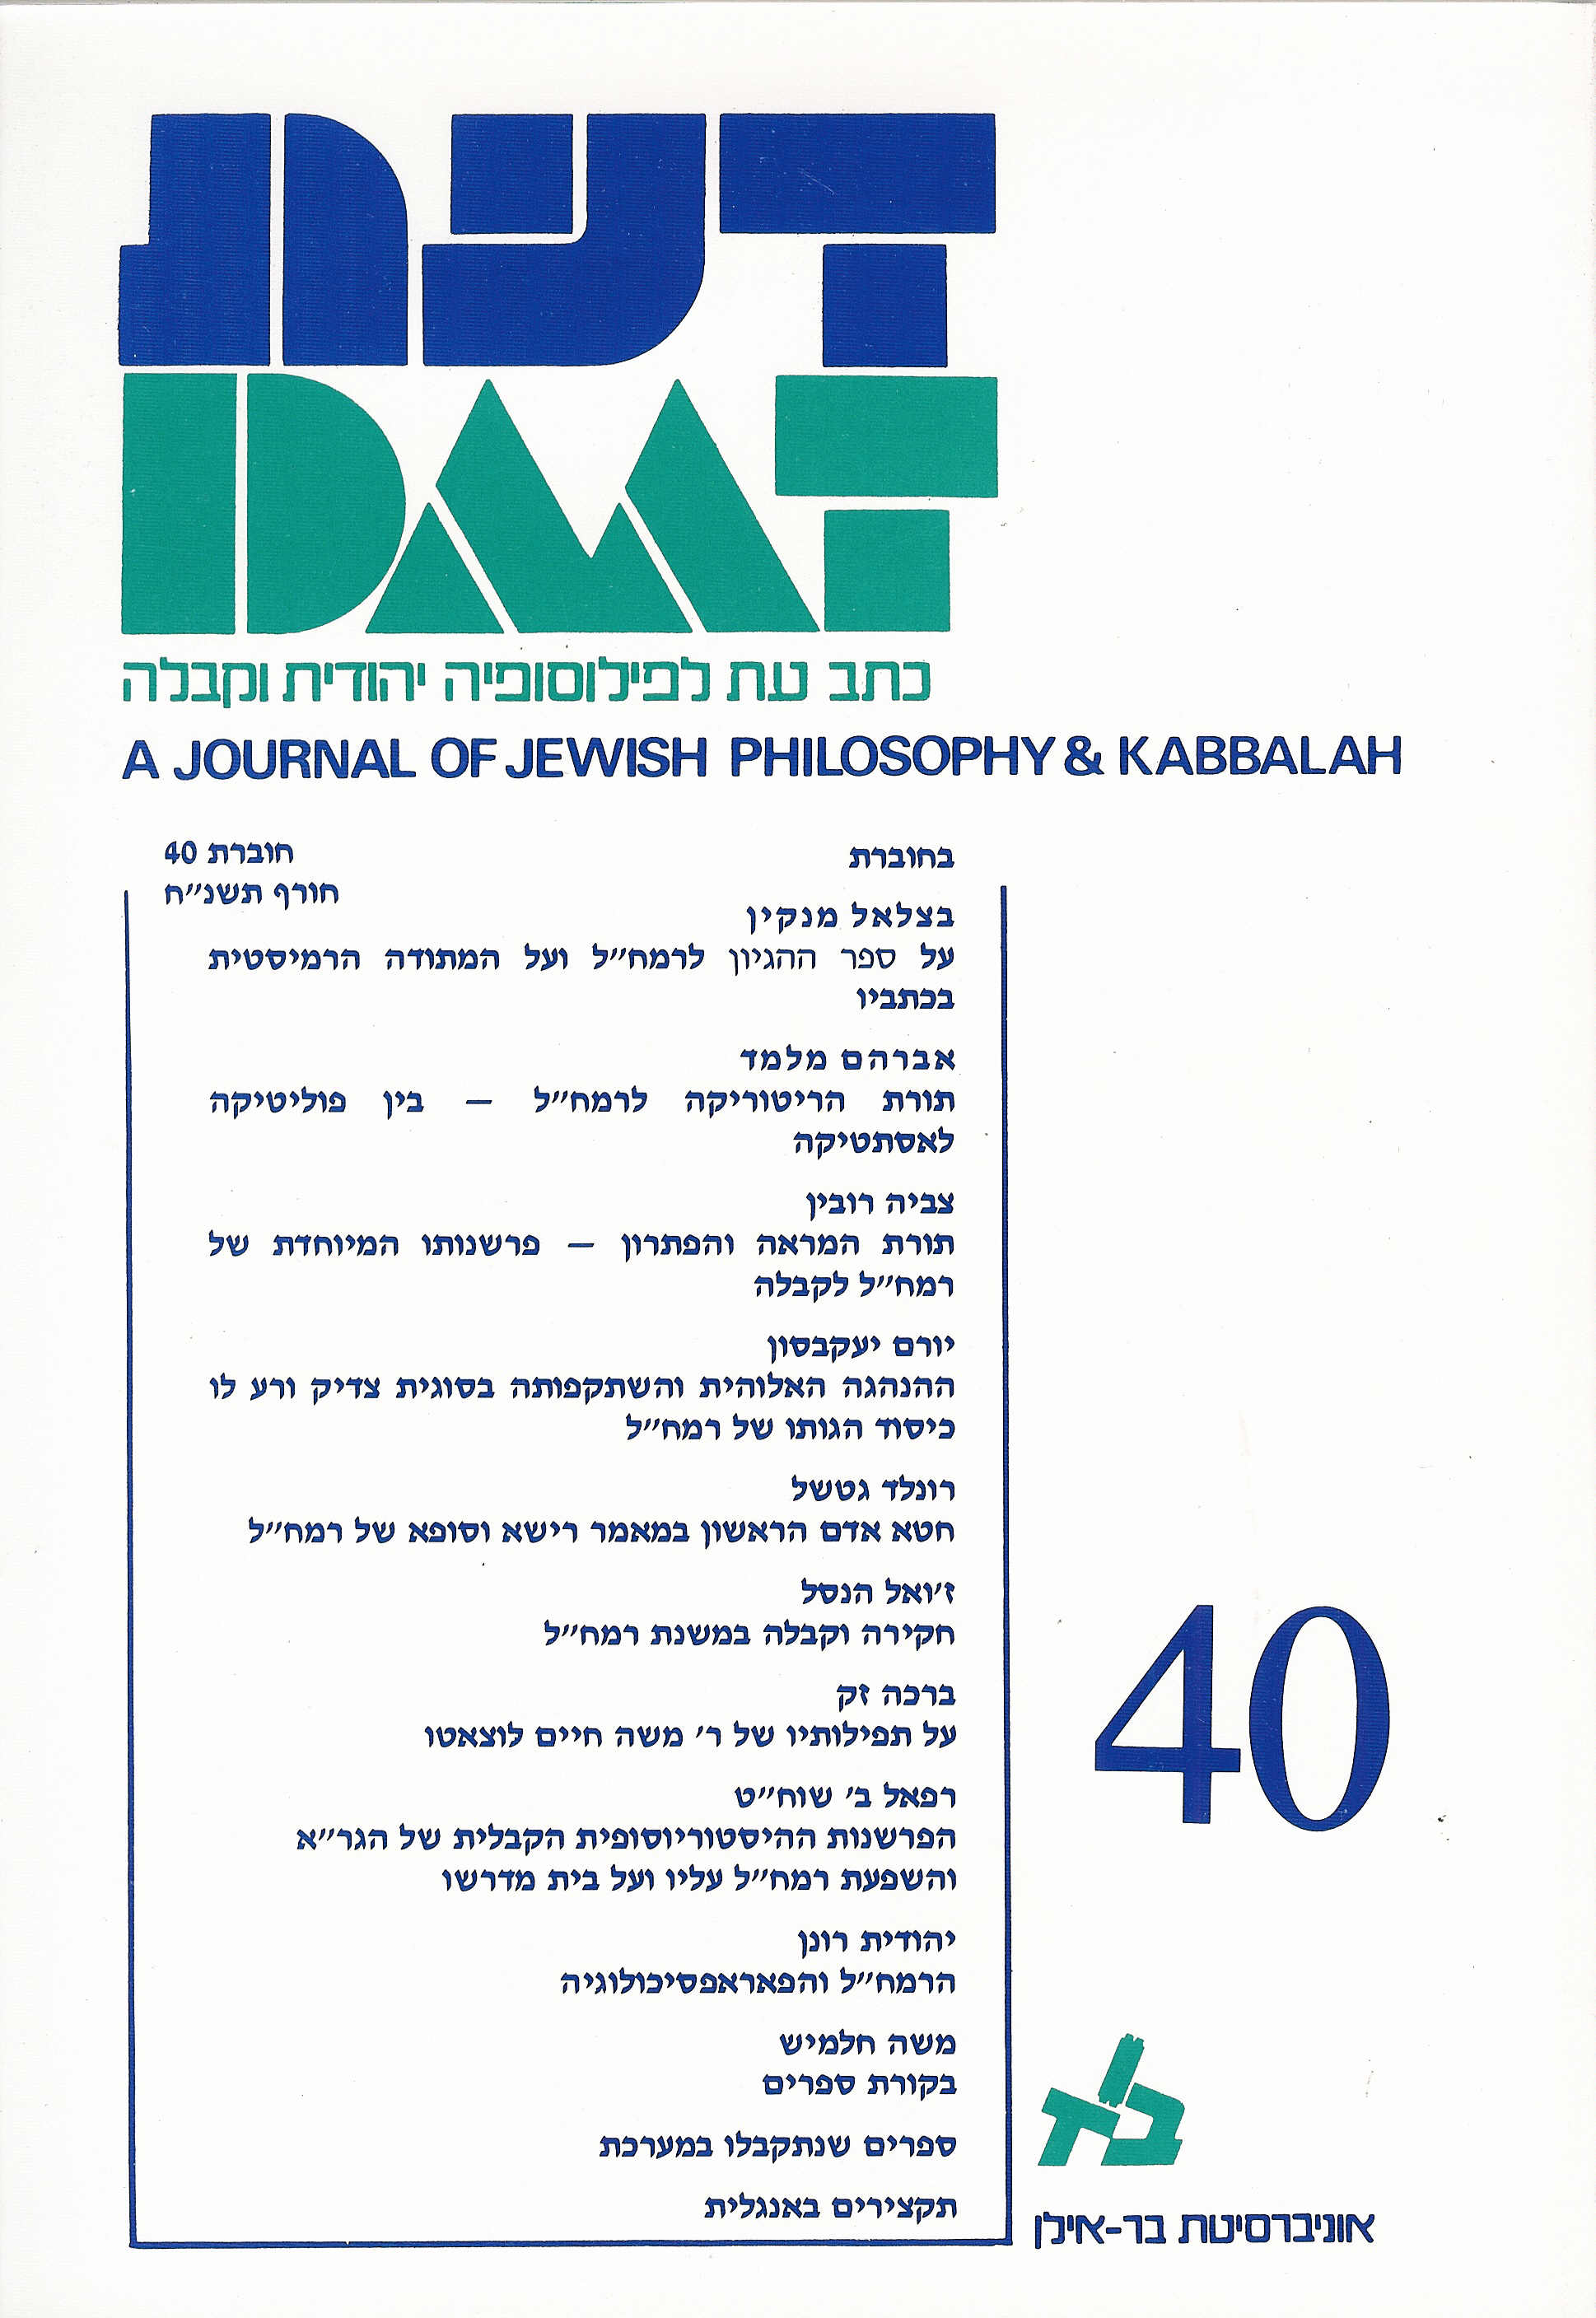 Daat 40 Dedicated to the Life and Works of R. Moshe Haim Luzzatto